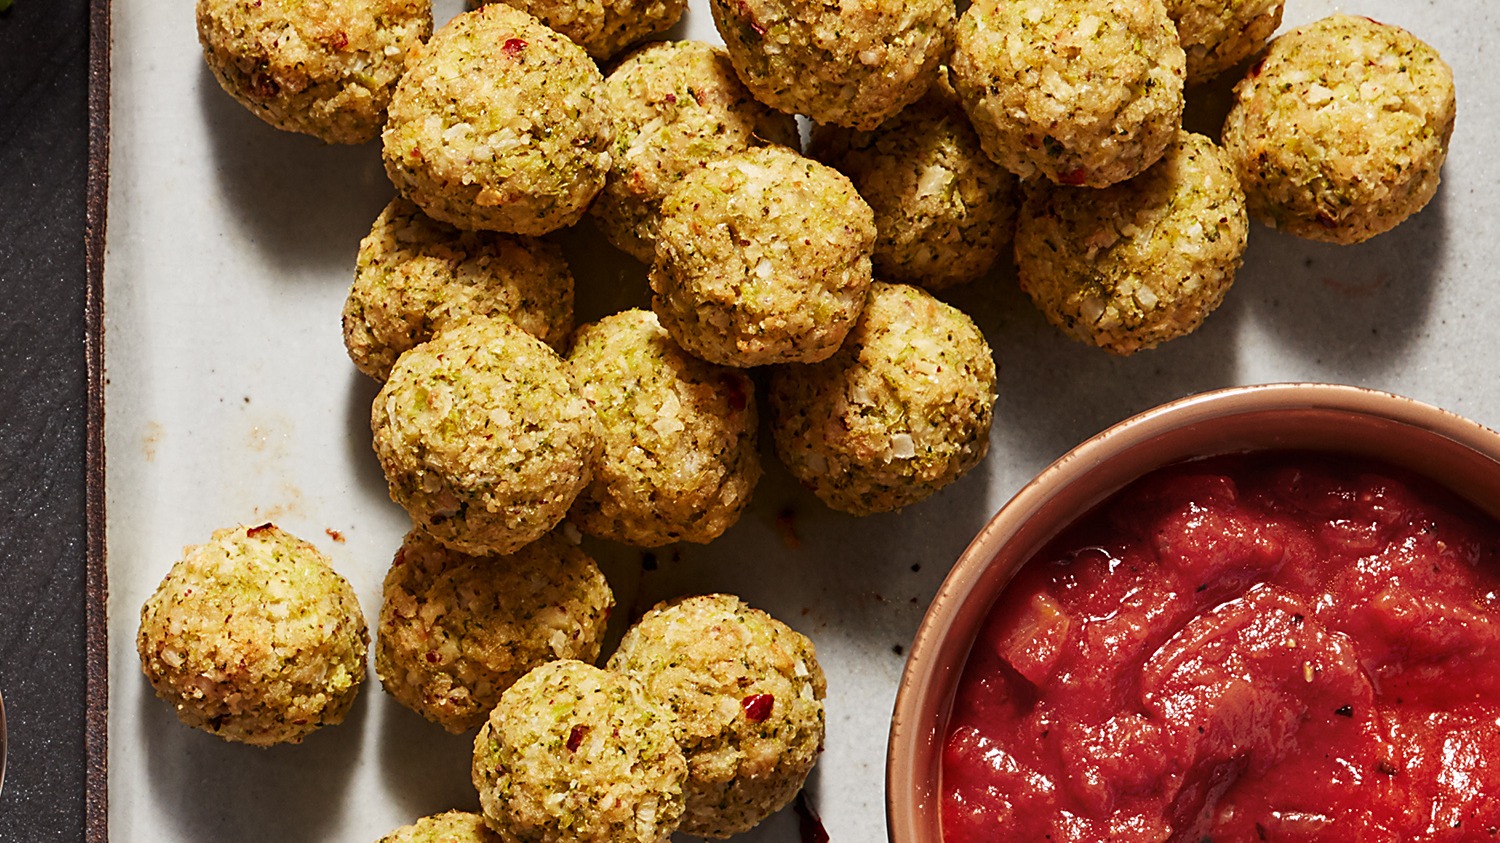 Rachael Ray's Vegetarian Meatballs with Red Sauce